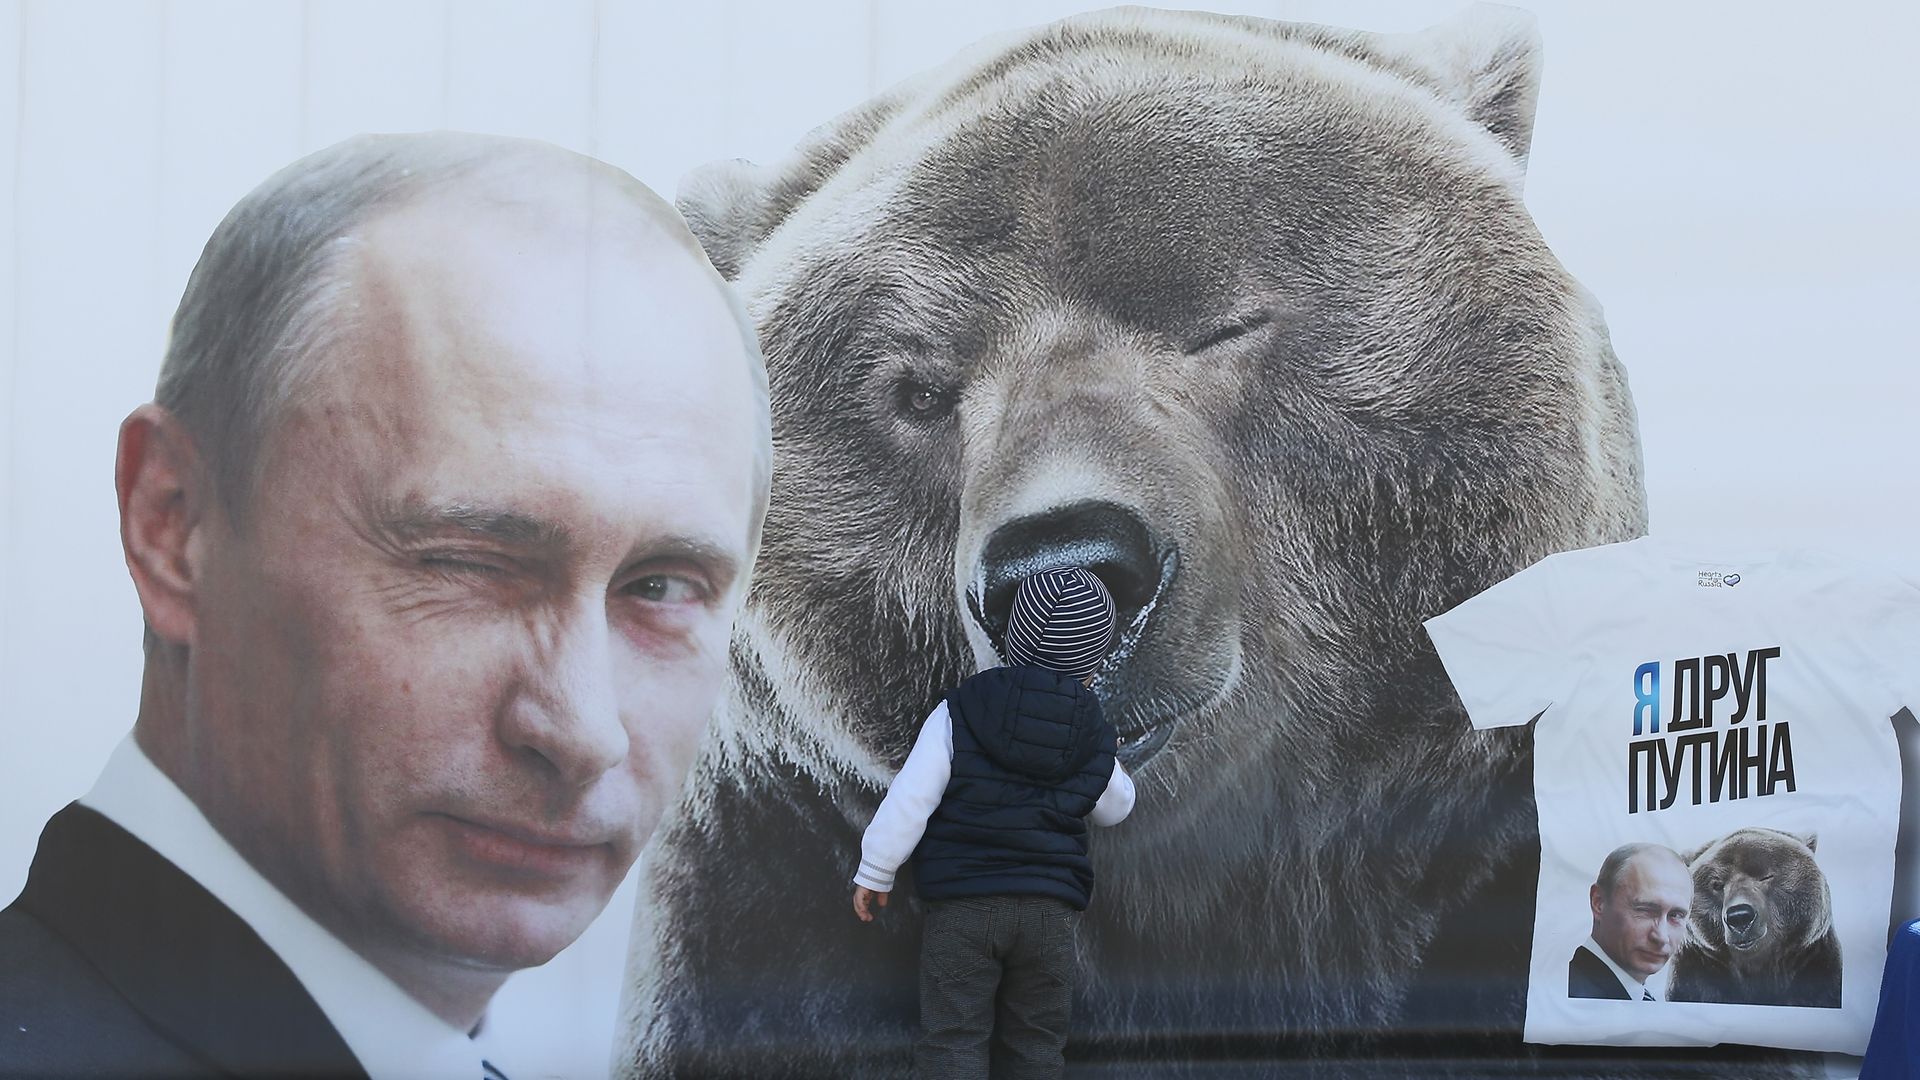 Billboard of winking Vladimir Putin next to a winking bear. They are winking different eyes. 